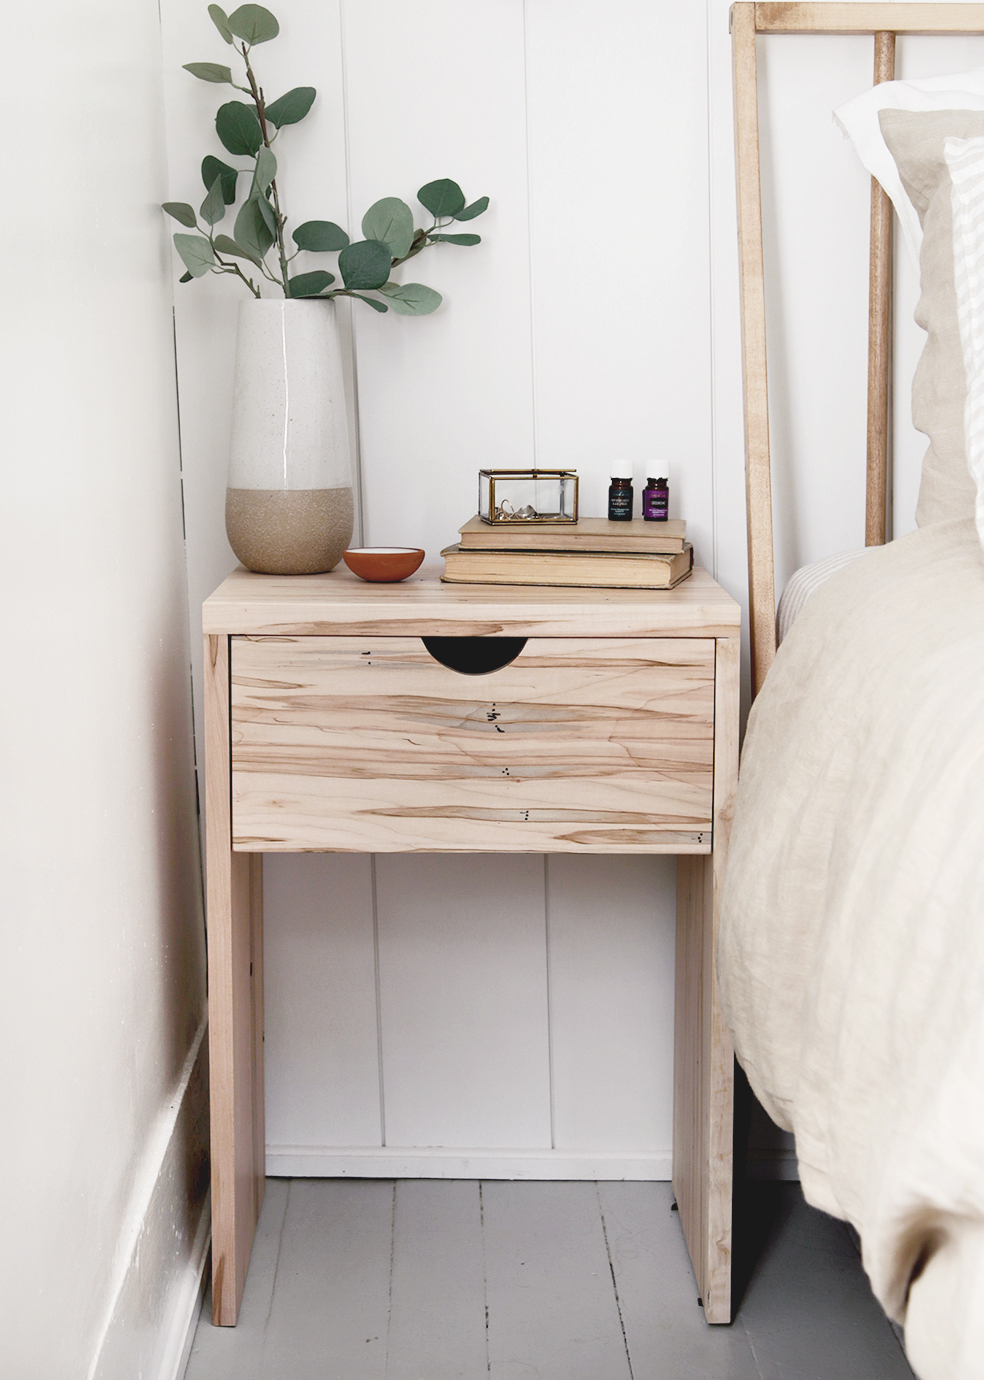 DIY Nightstand - How to Make a Wood Nightstand with Drawer